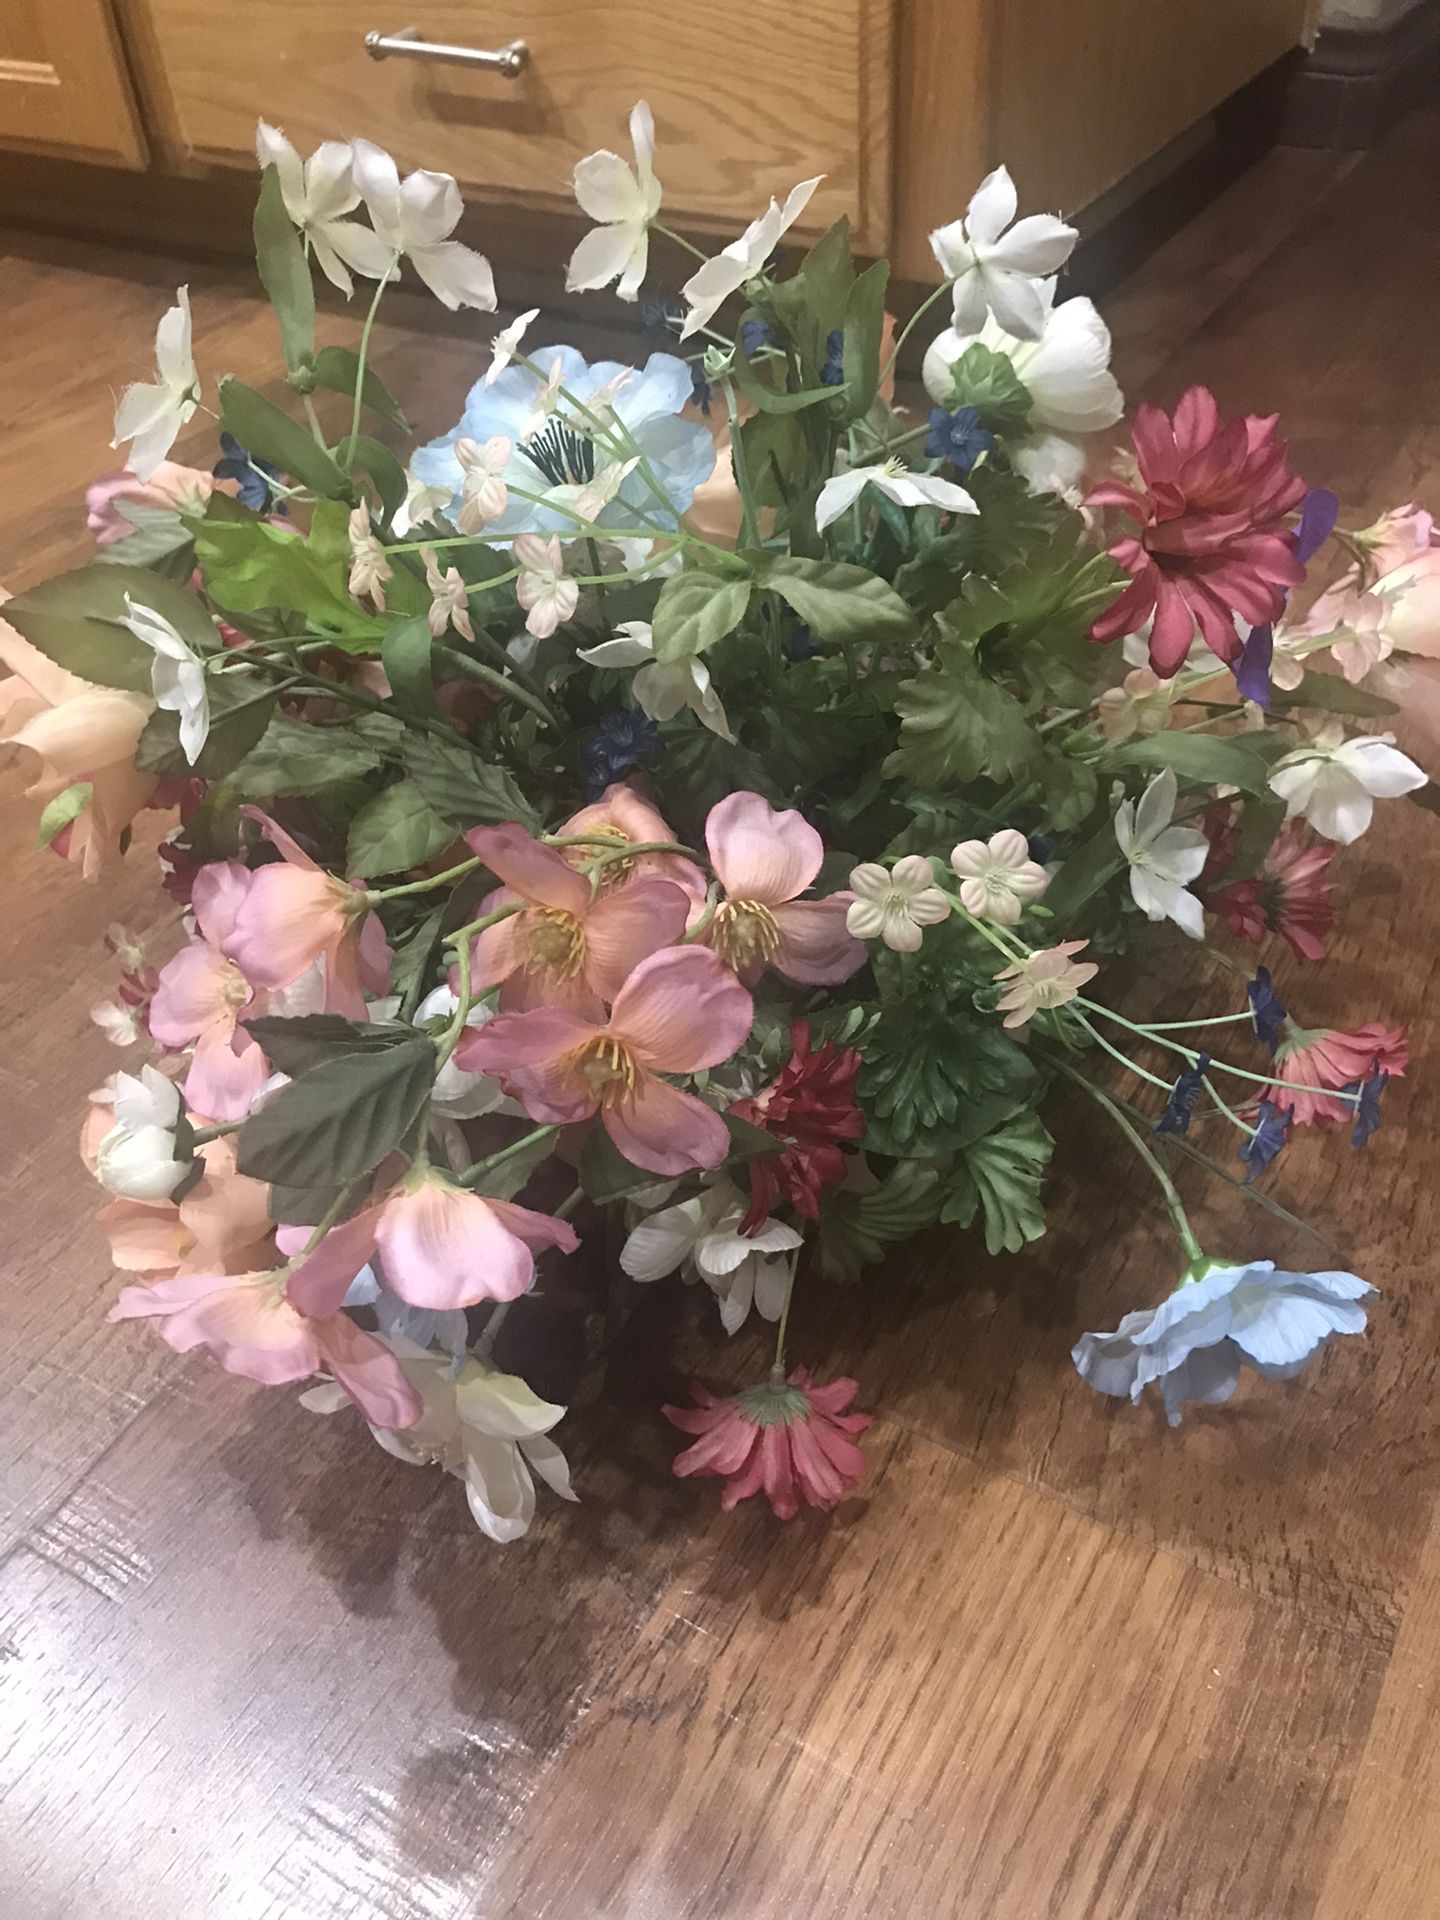 Vase With Flowers In Good Condition Pickup In Southwest Bakersfield 